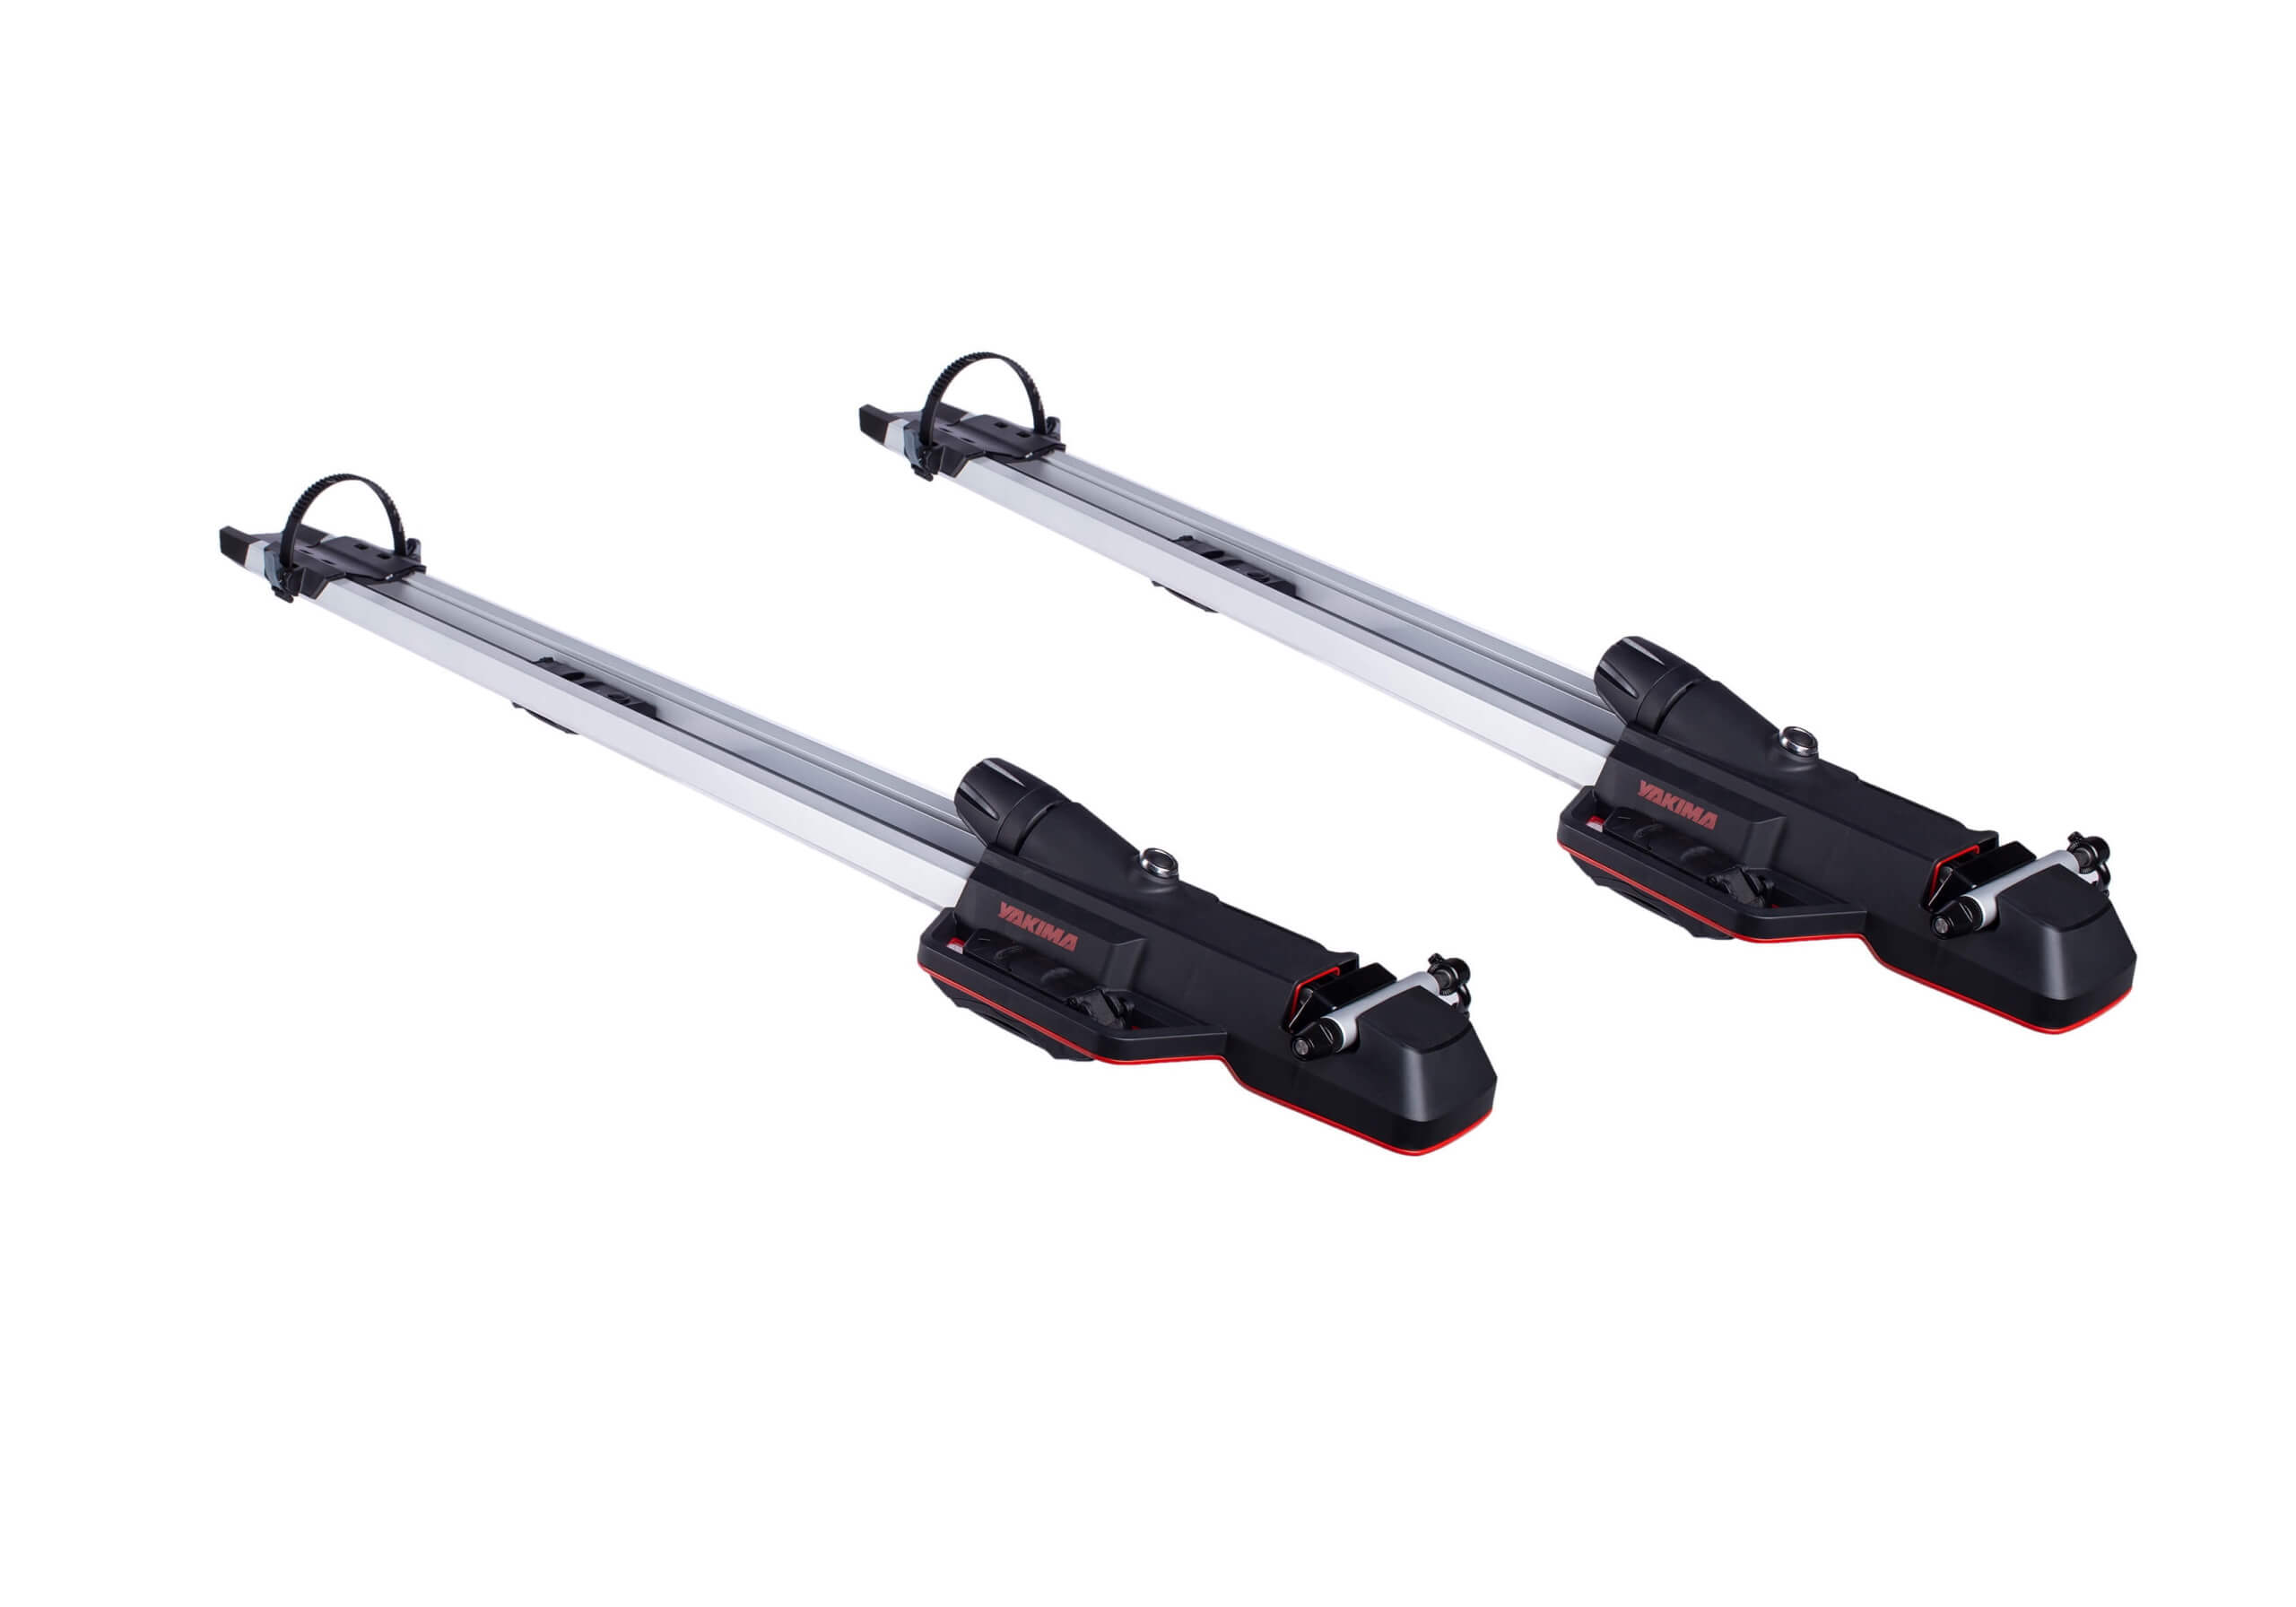 2 x silver Yakima HighSpeed 8002129 forkmounts with locking roof bars